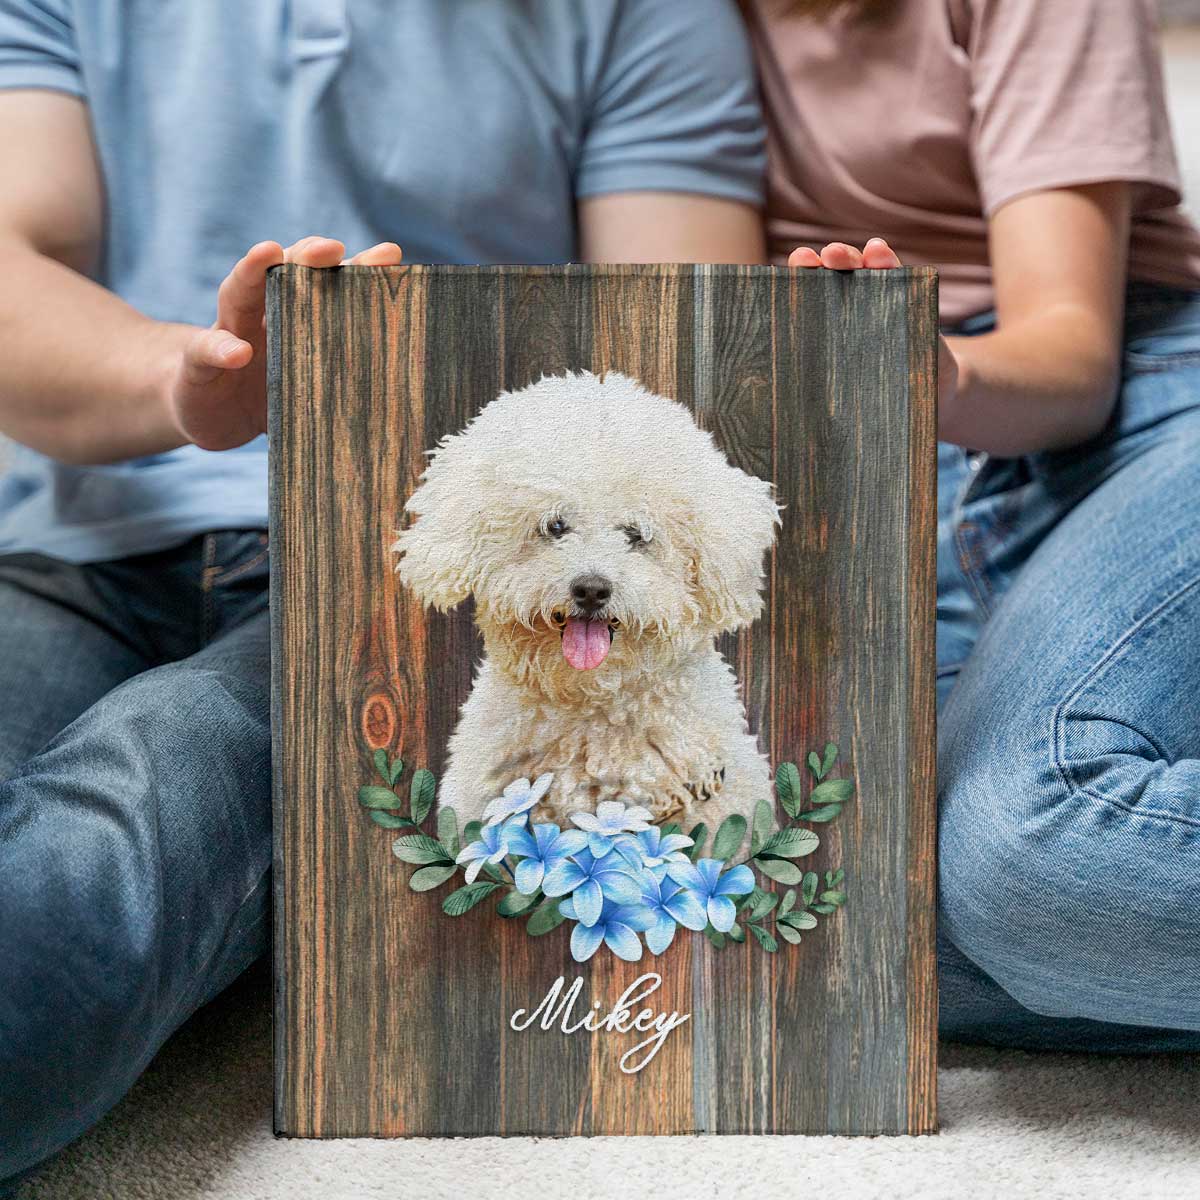 Pet Portrait Painting, Custom Gifts For Dog Owners, Cute Dog Portrait with Flowers - Best Personalized Gifts for Everyone